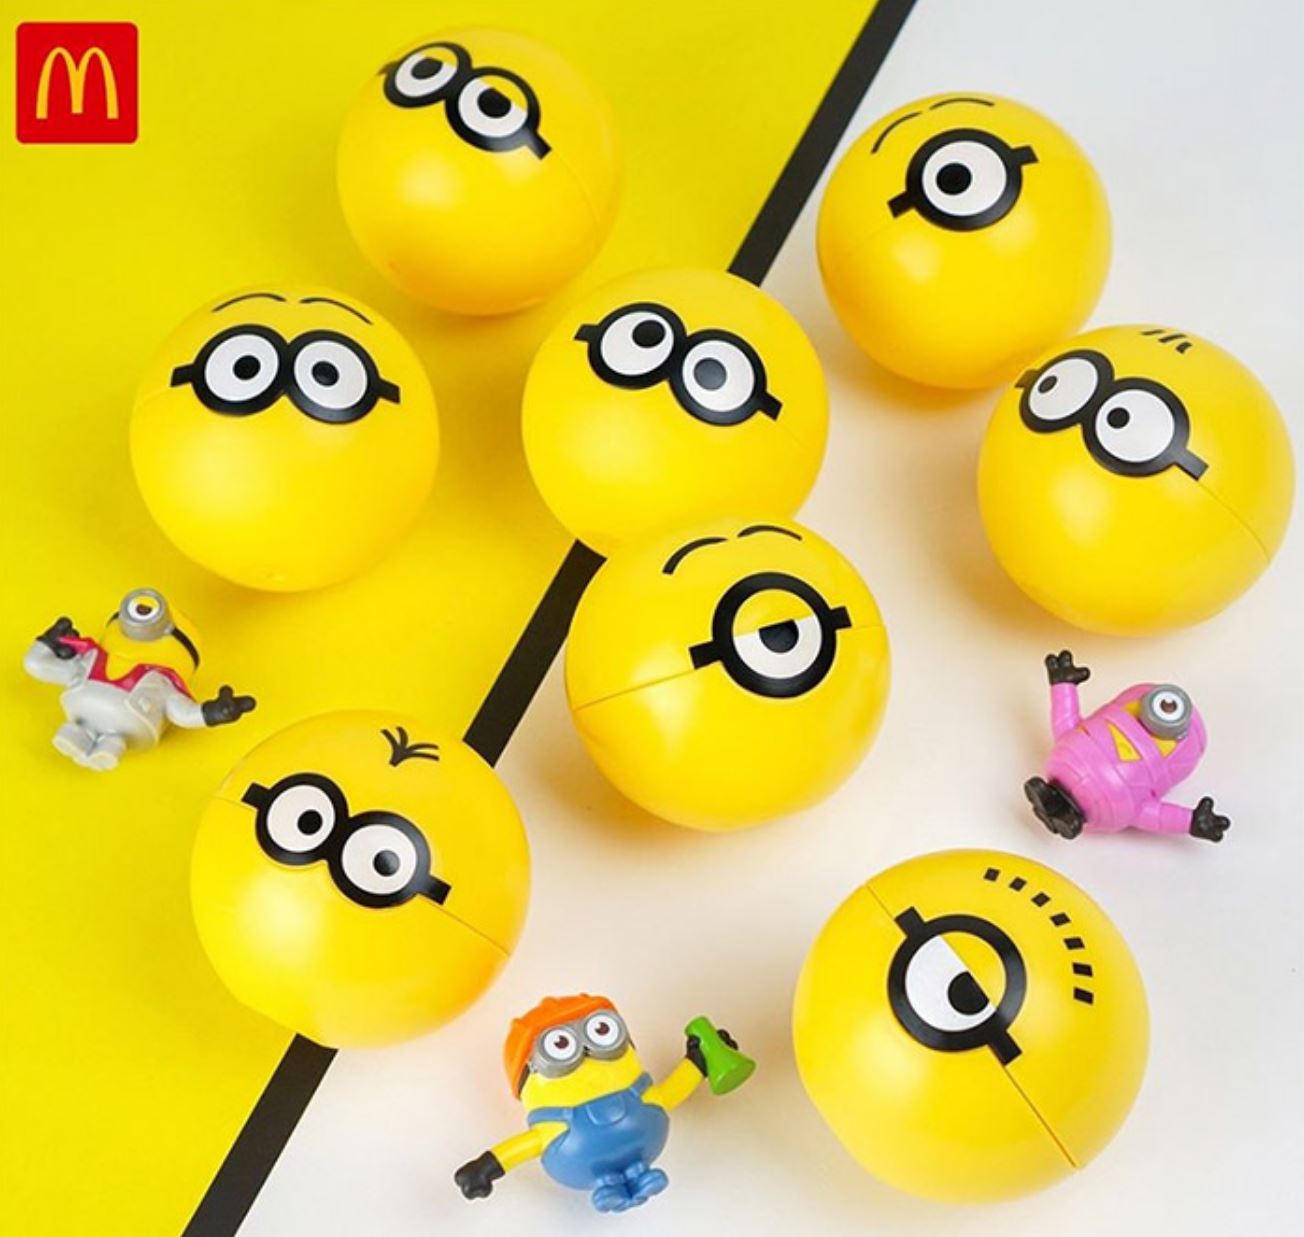 McDonald’s S’pore Launching New Minion Toy Collectibles (with rare Golden ones) and Nacho Cheese Sauce Bottle - 2